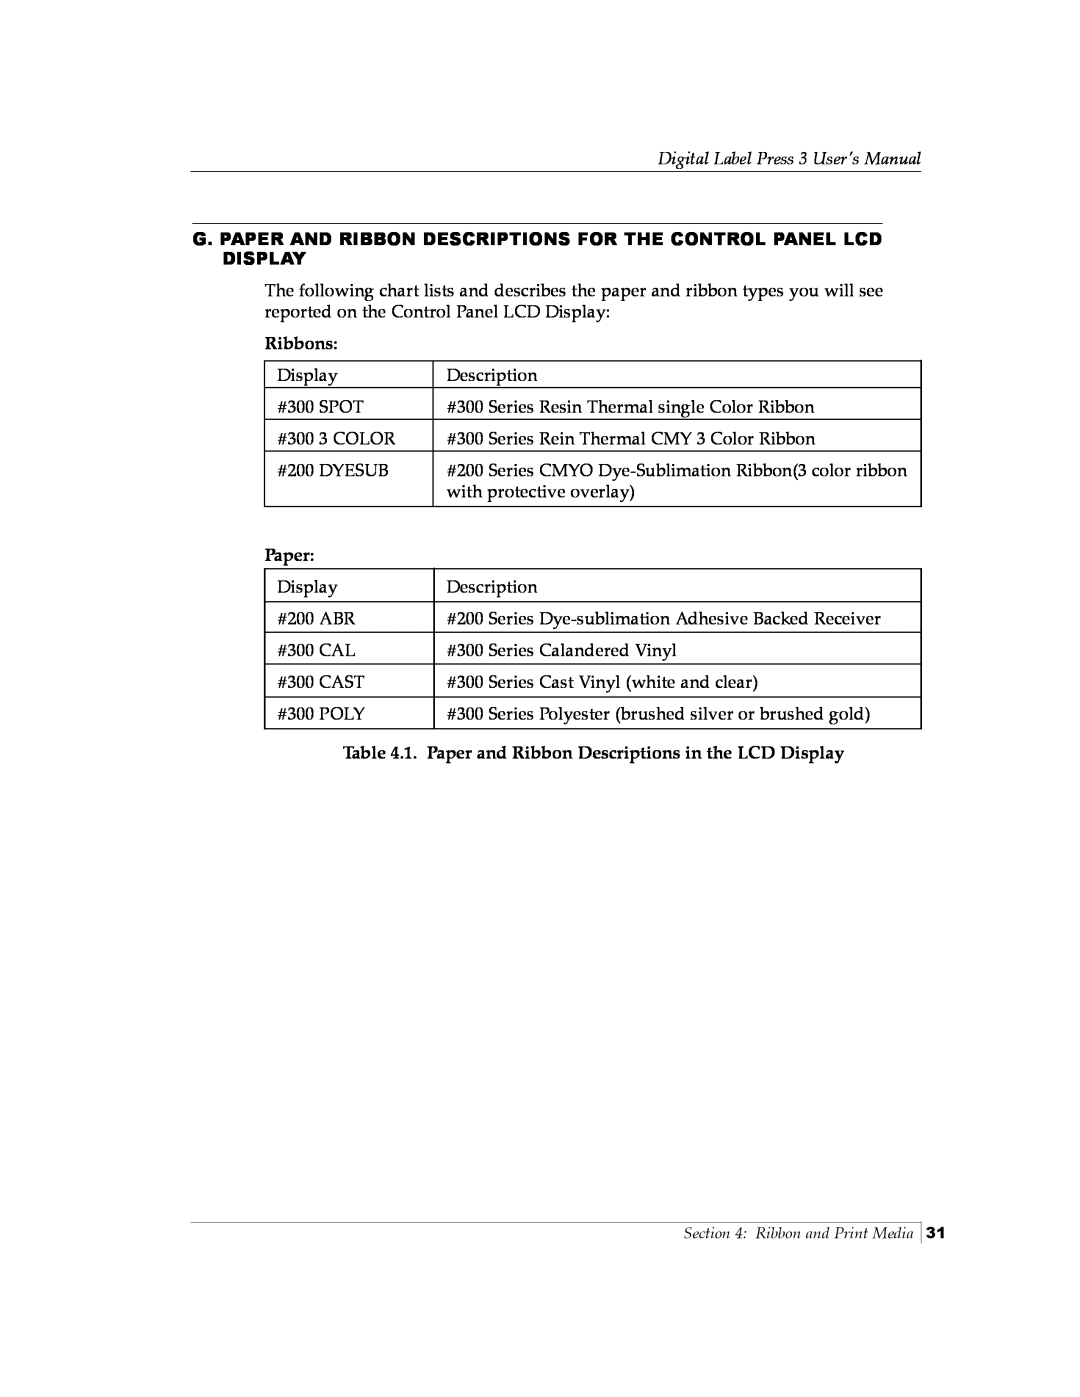 Primera Technology 510212 manual G. Paper And Ribbon Descriptions For The Control Panel Lcd Display, Ribbons 